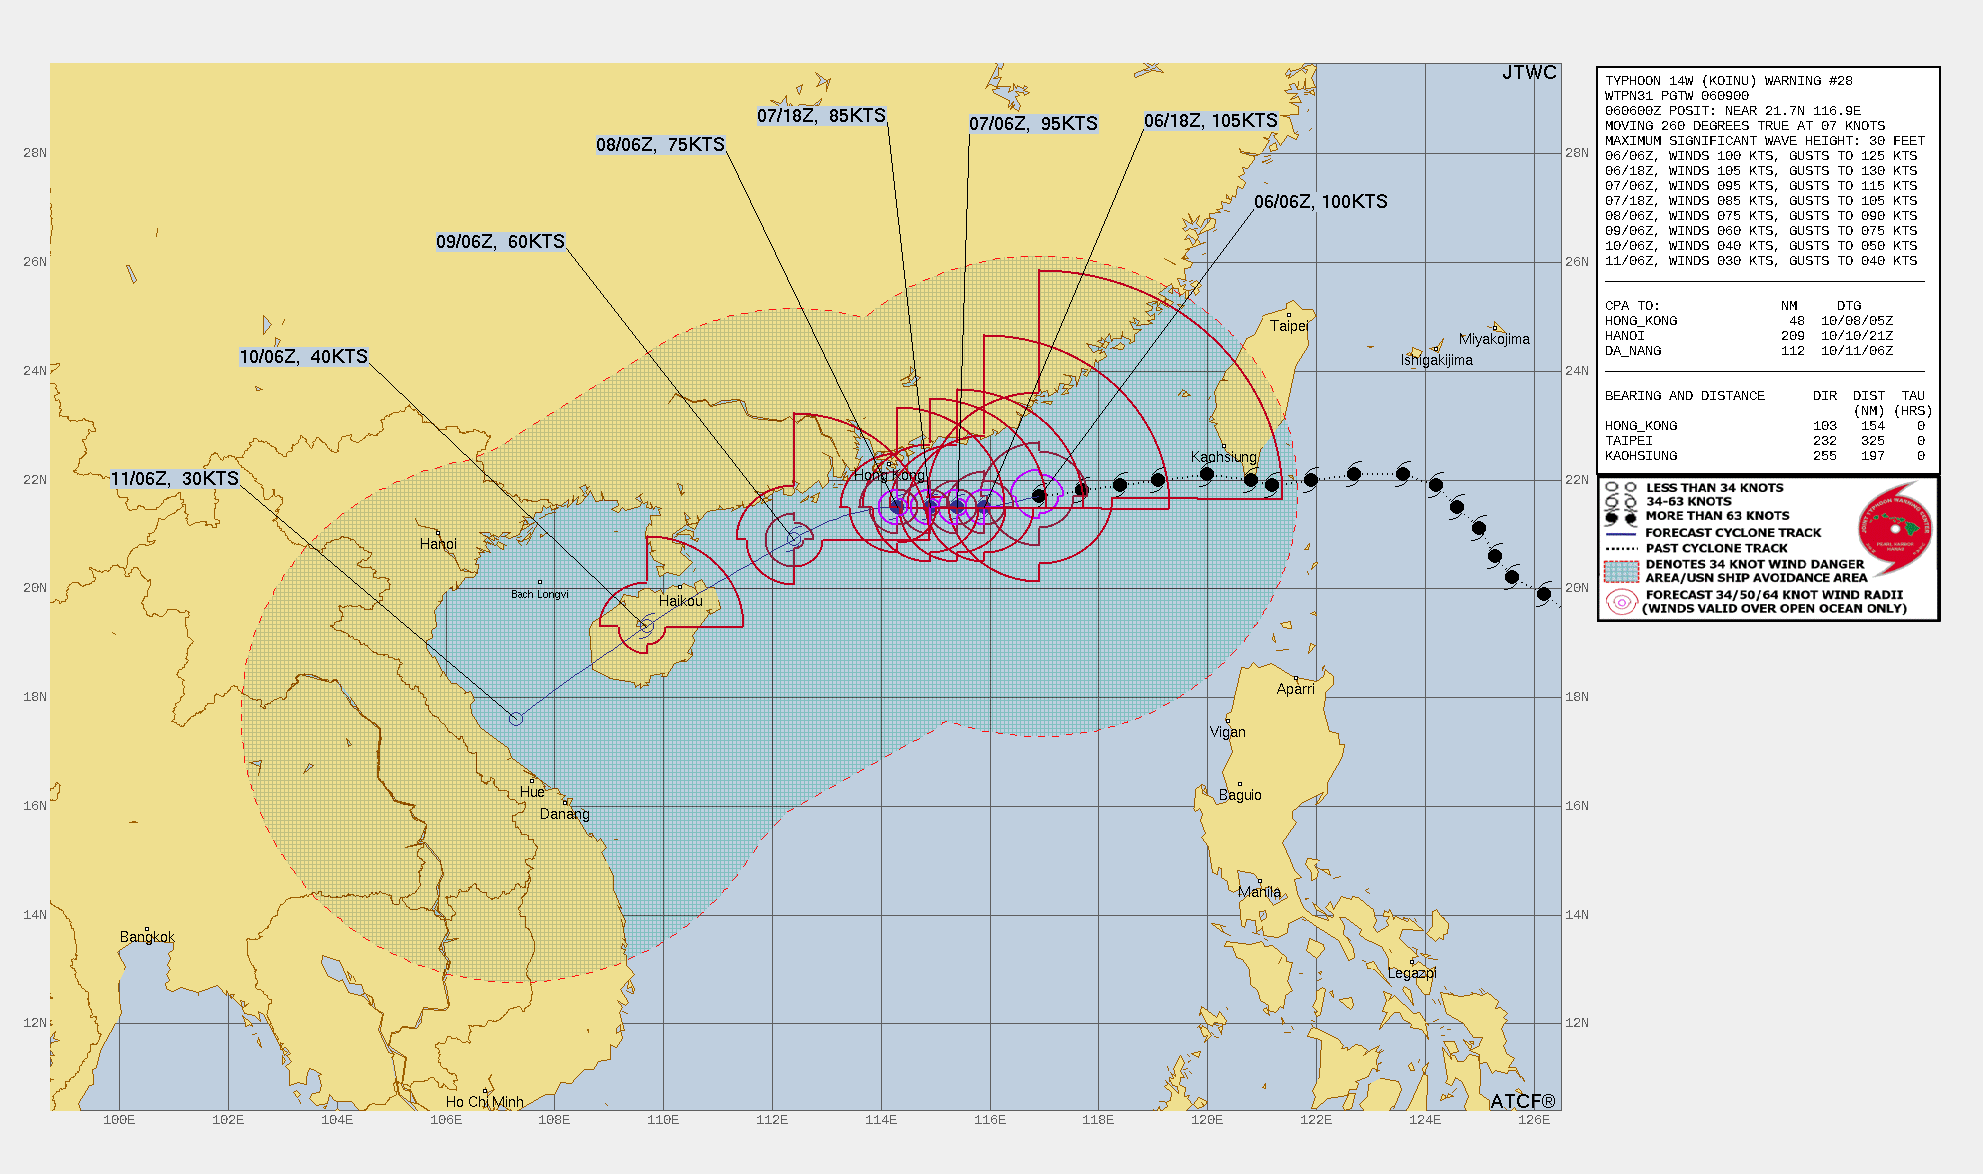 FORECAST REASONING.  SIGNIFICANT FORECAST CHANGES: THERE HAS BEEN A SIGNIFICANT SHIFT IN THE FORECAST INTENSITY OF TY 14W SINCE THE PREVIOUS WARNING (027).  THIS IS DUE TO THE UNFORESEEN OCCURRENCE OF RAPID INTENSIFICATION SINCE 060000Z.  FORECAST DISCUSSION: TY 14W IS FORECAST TO TRACK WEST THROUGH TAU 48 WITH PARTICULARLY SLOW TRACK SPEEDS (2-4 KTS) FROM TAU 12 TO TAU 48 DUE TO A SUBTROPICAL RIDGE (STR) CENTERED OVER NORTHERN VIETNAM. FOLLOWING THIS ENCOUNTER, 14W IS EXPECTED TO FOLLOW THE STEERING INFLUENCE OF THE STR AND TURN SOUTHWESTWARD FROM TAU 48 TO TAU 72 AND MAINTAIN THIS HEADING THROUGH TAU 120.  CLEARLY, THE SYSTEM IS IN A HIGHLY FAVORABLE ENVIRONMENT AND THE AFOREMENTIONED COMPACT STRUCTURE SEEMS TO BE KEEPING THE DRY AIR AHEAD OF TRACK OUT  OF THE SYSTEM FOR THE TIME BEING.  HOWEVER, TY 14 SLOWING DOWN AFTER  TAU 12 WILL CAUSE DETRIMENTAL UPWELLING TO OCCUR, WHICH IS ANTICIPATED  TO WEAKEN THE SYSTEM INTENSITY STARTING AT TAU 12. THE FORECAST  CONFIDENCE FROM TAU 00 TO TAU 72 FOR BOTH TRACK AND INTENSITY IS  MEDIUM, AND LOW THEREAFTER.